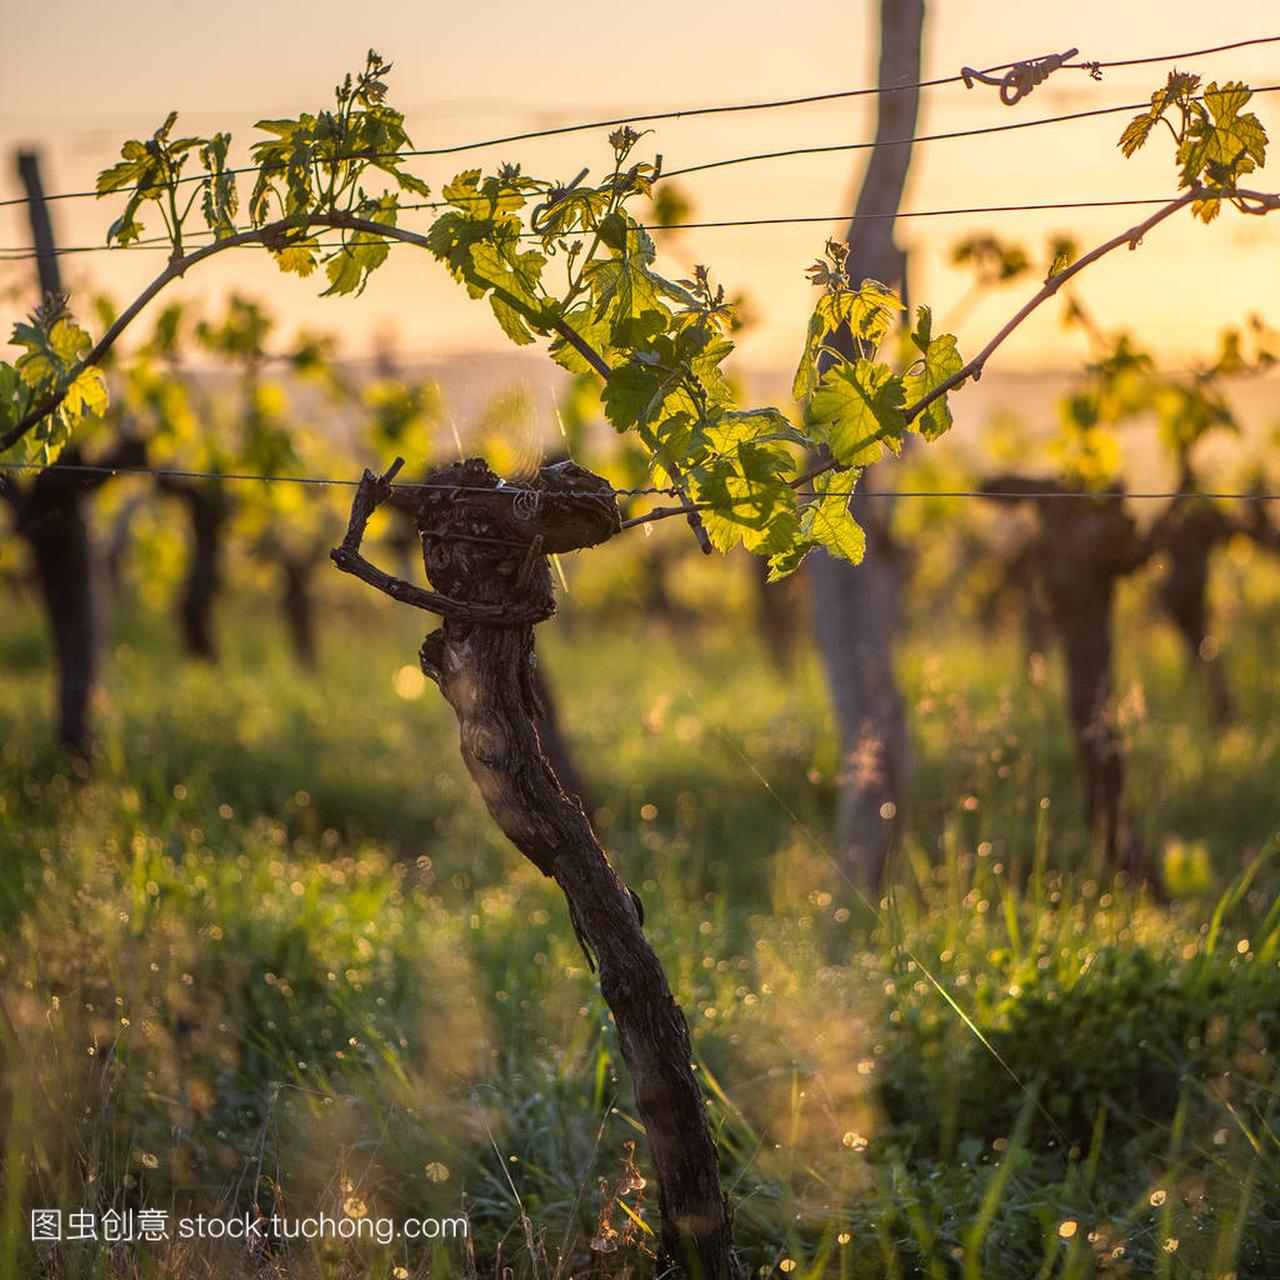 ng branch with sunlights in Bordeaux vineyards,